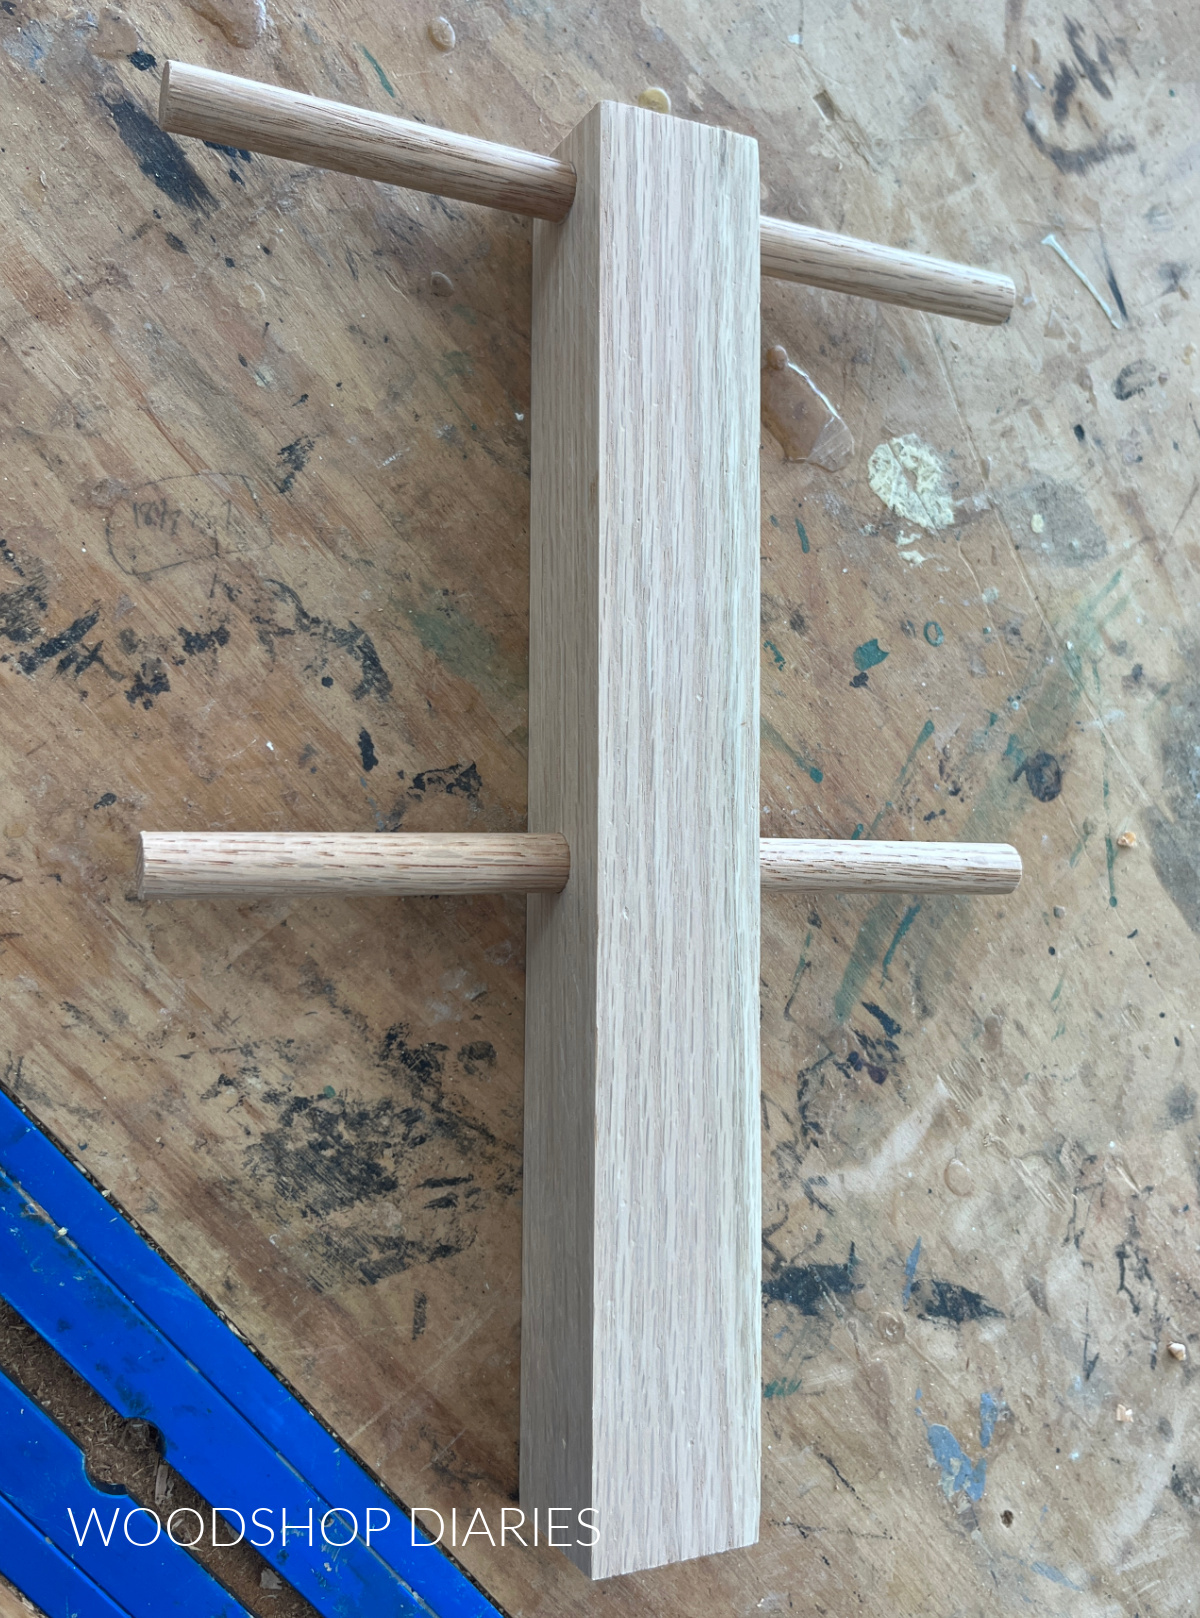 Mug holder post assembled--a 2x2 with 4 pegs made from ½" diameter dowels